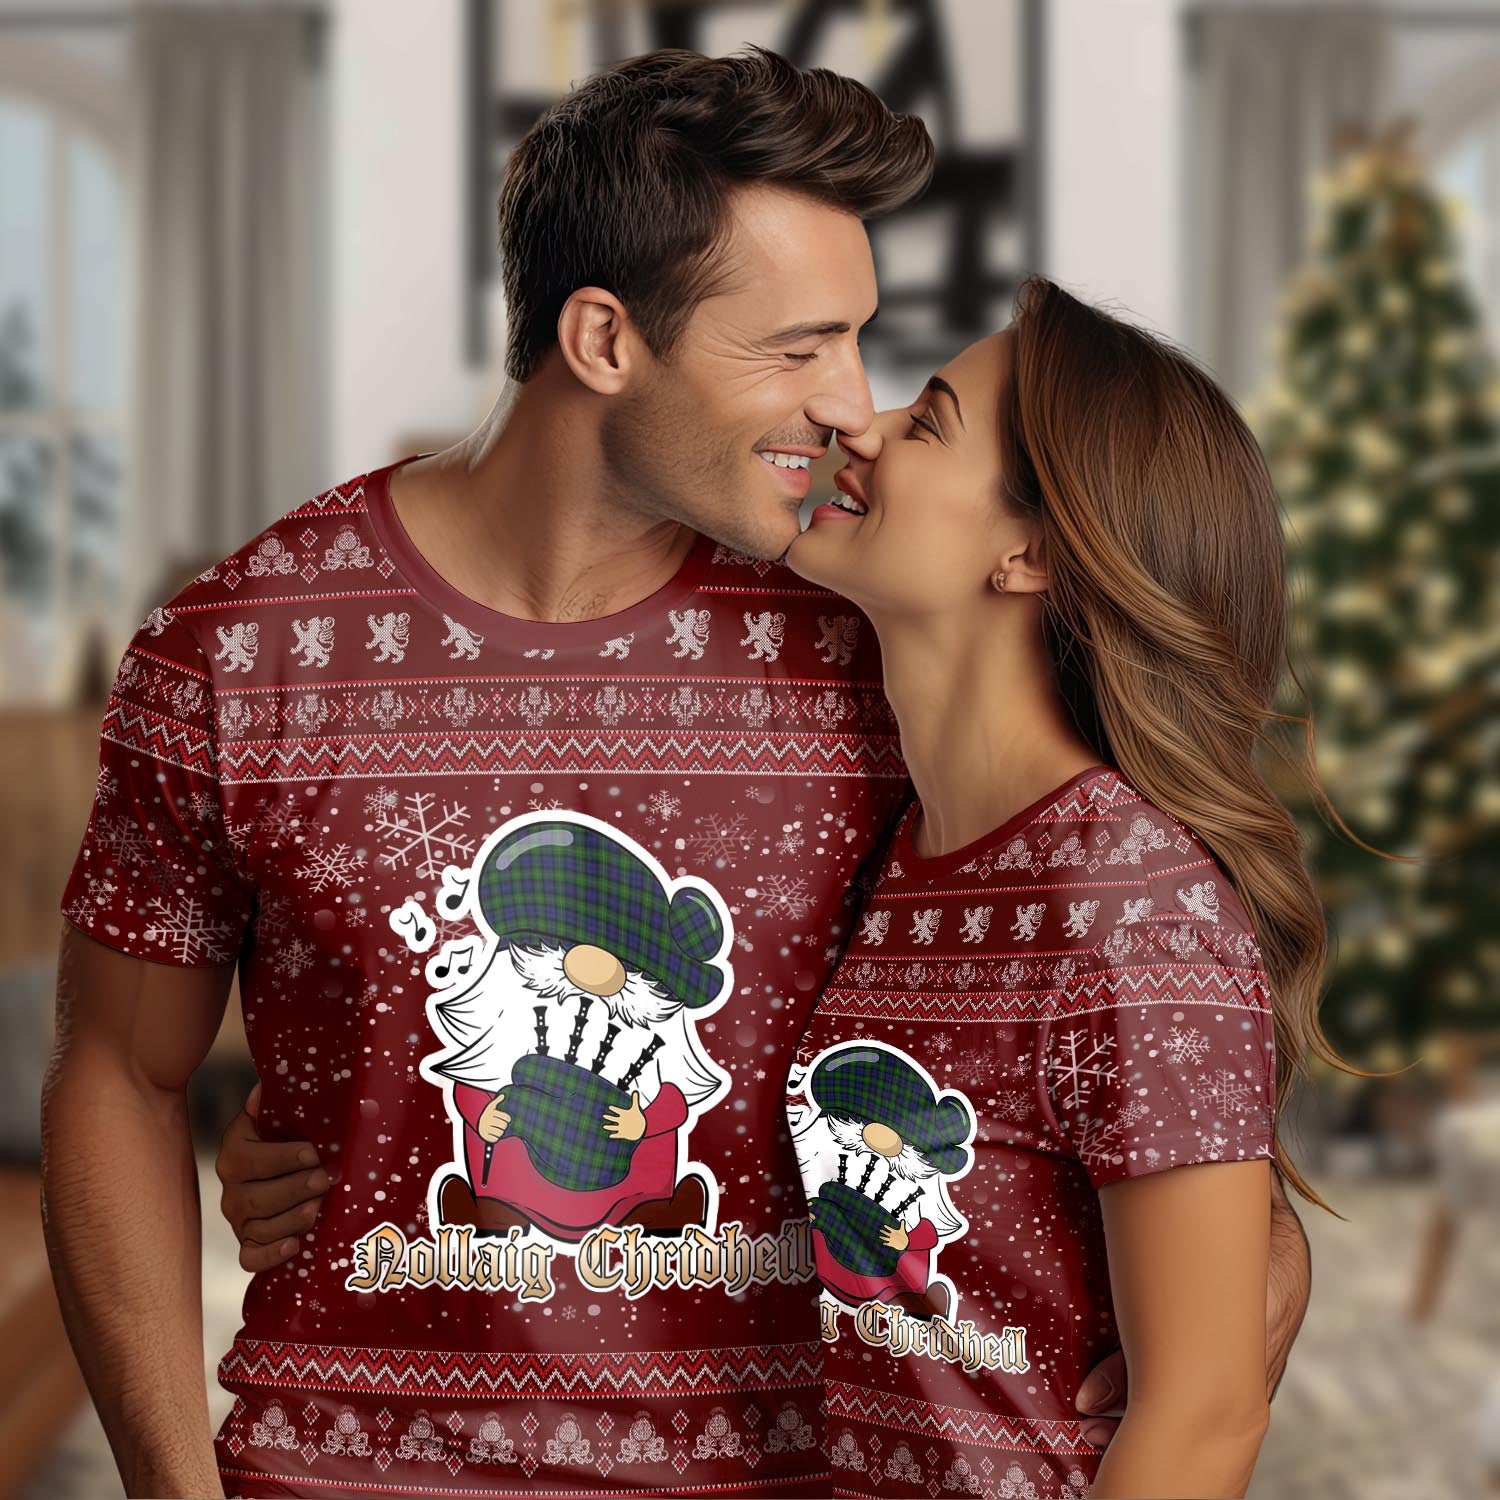 Gordon Clan Christmas Family T-Shirt with Funny Gnome Playing Bagpipes Women's Shirt Red - Tartanvibesclothing